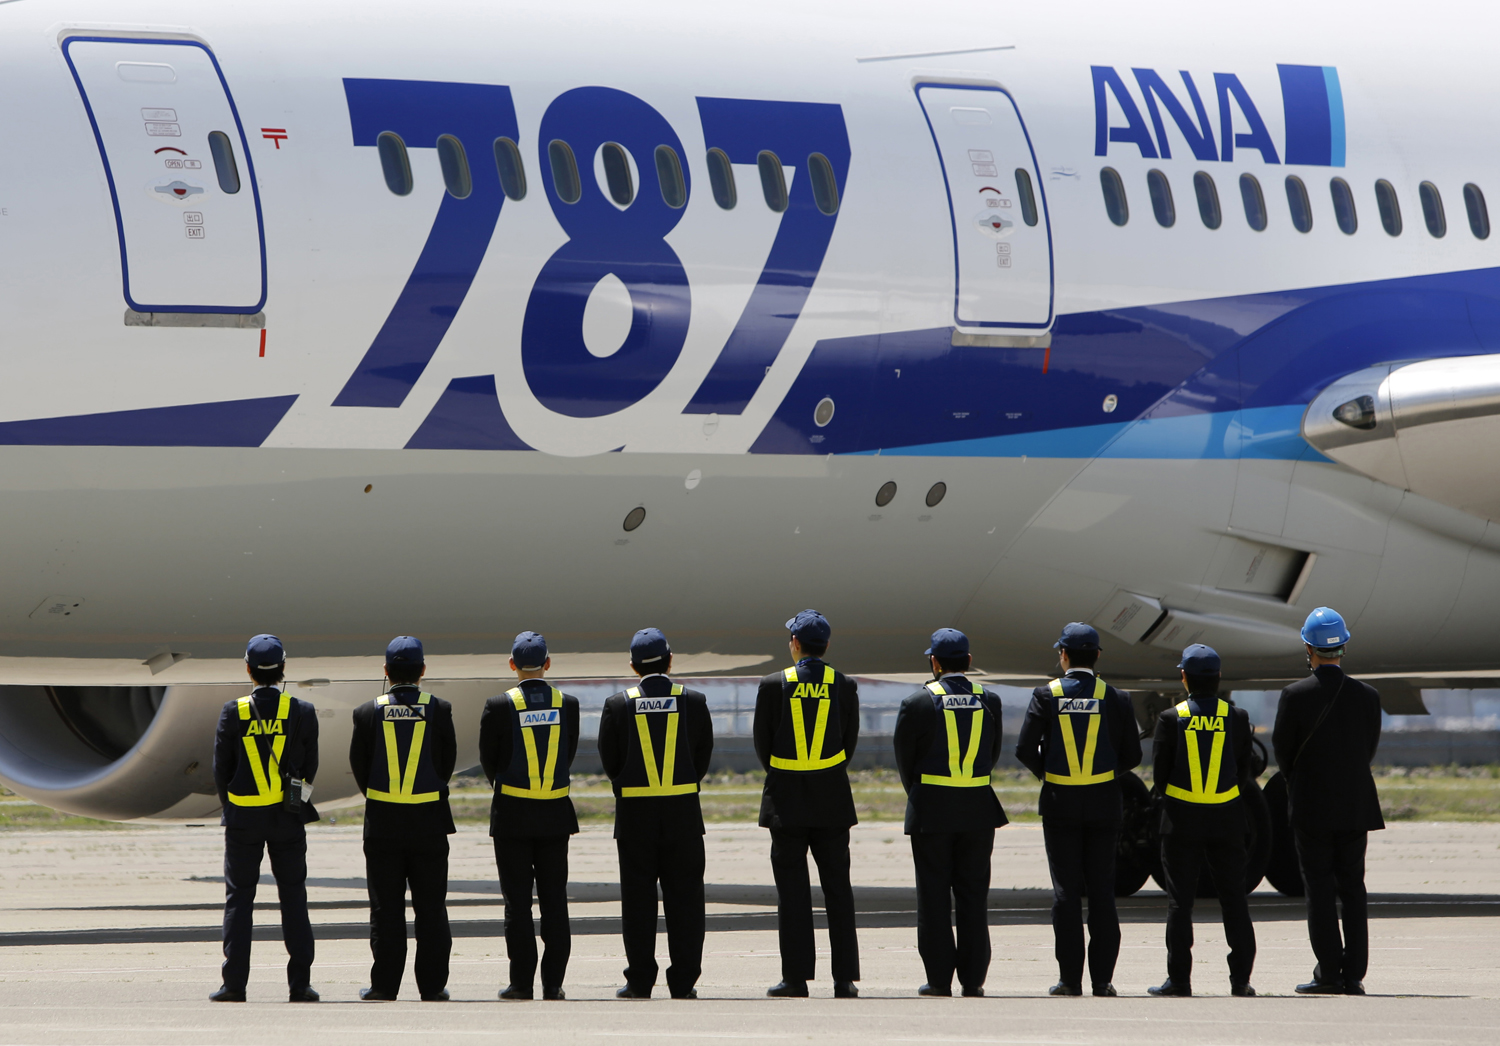 Employees of All Nippon Airways queue in front of the company's Boeing 787 Dreamliner plane after it's test flight at Haneda airport in Tokyo